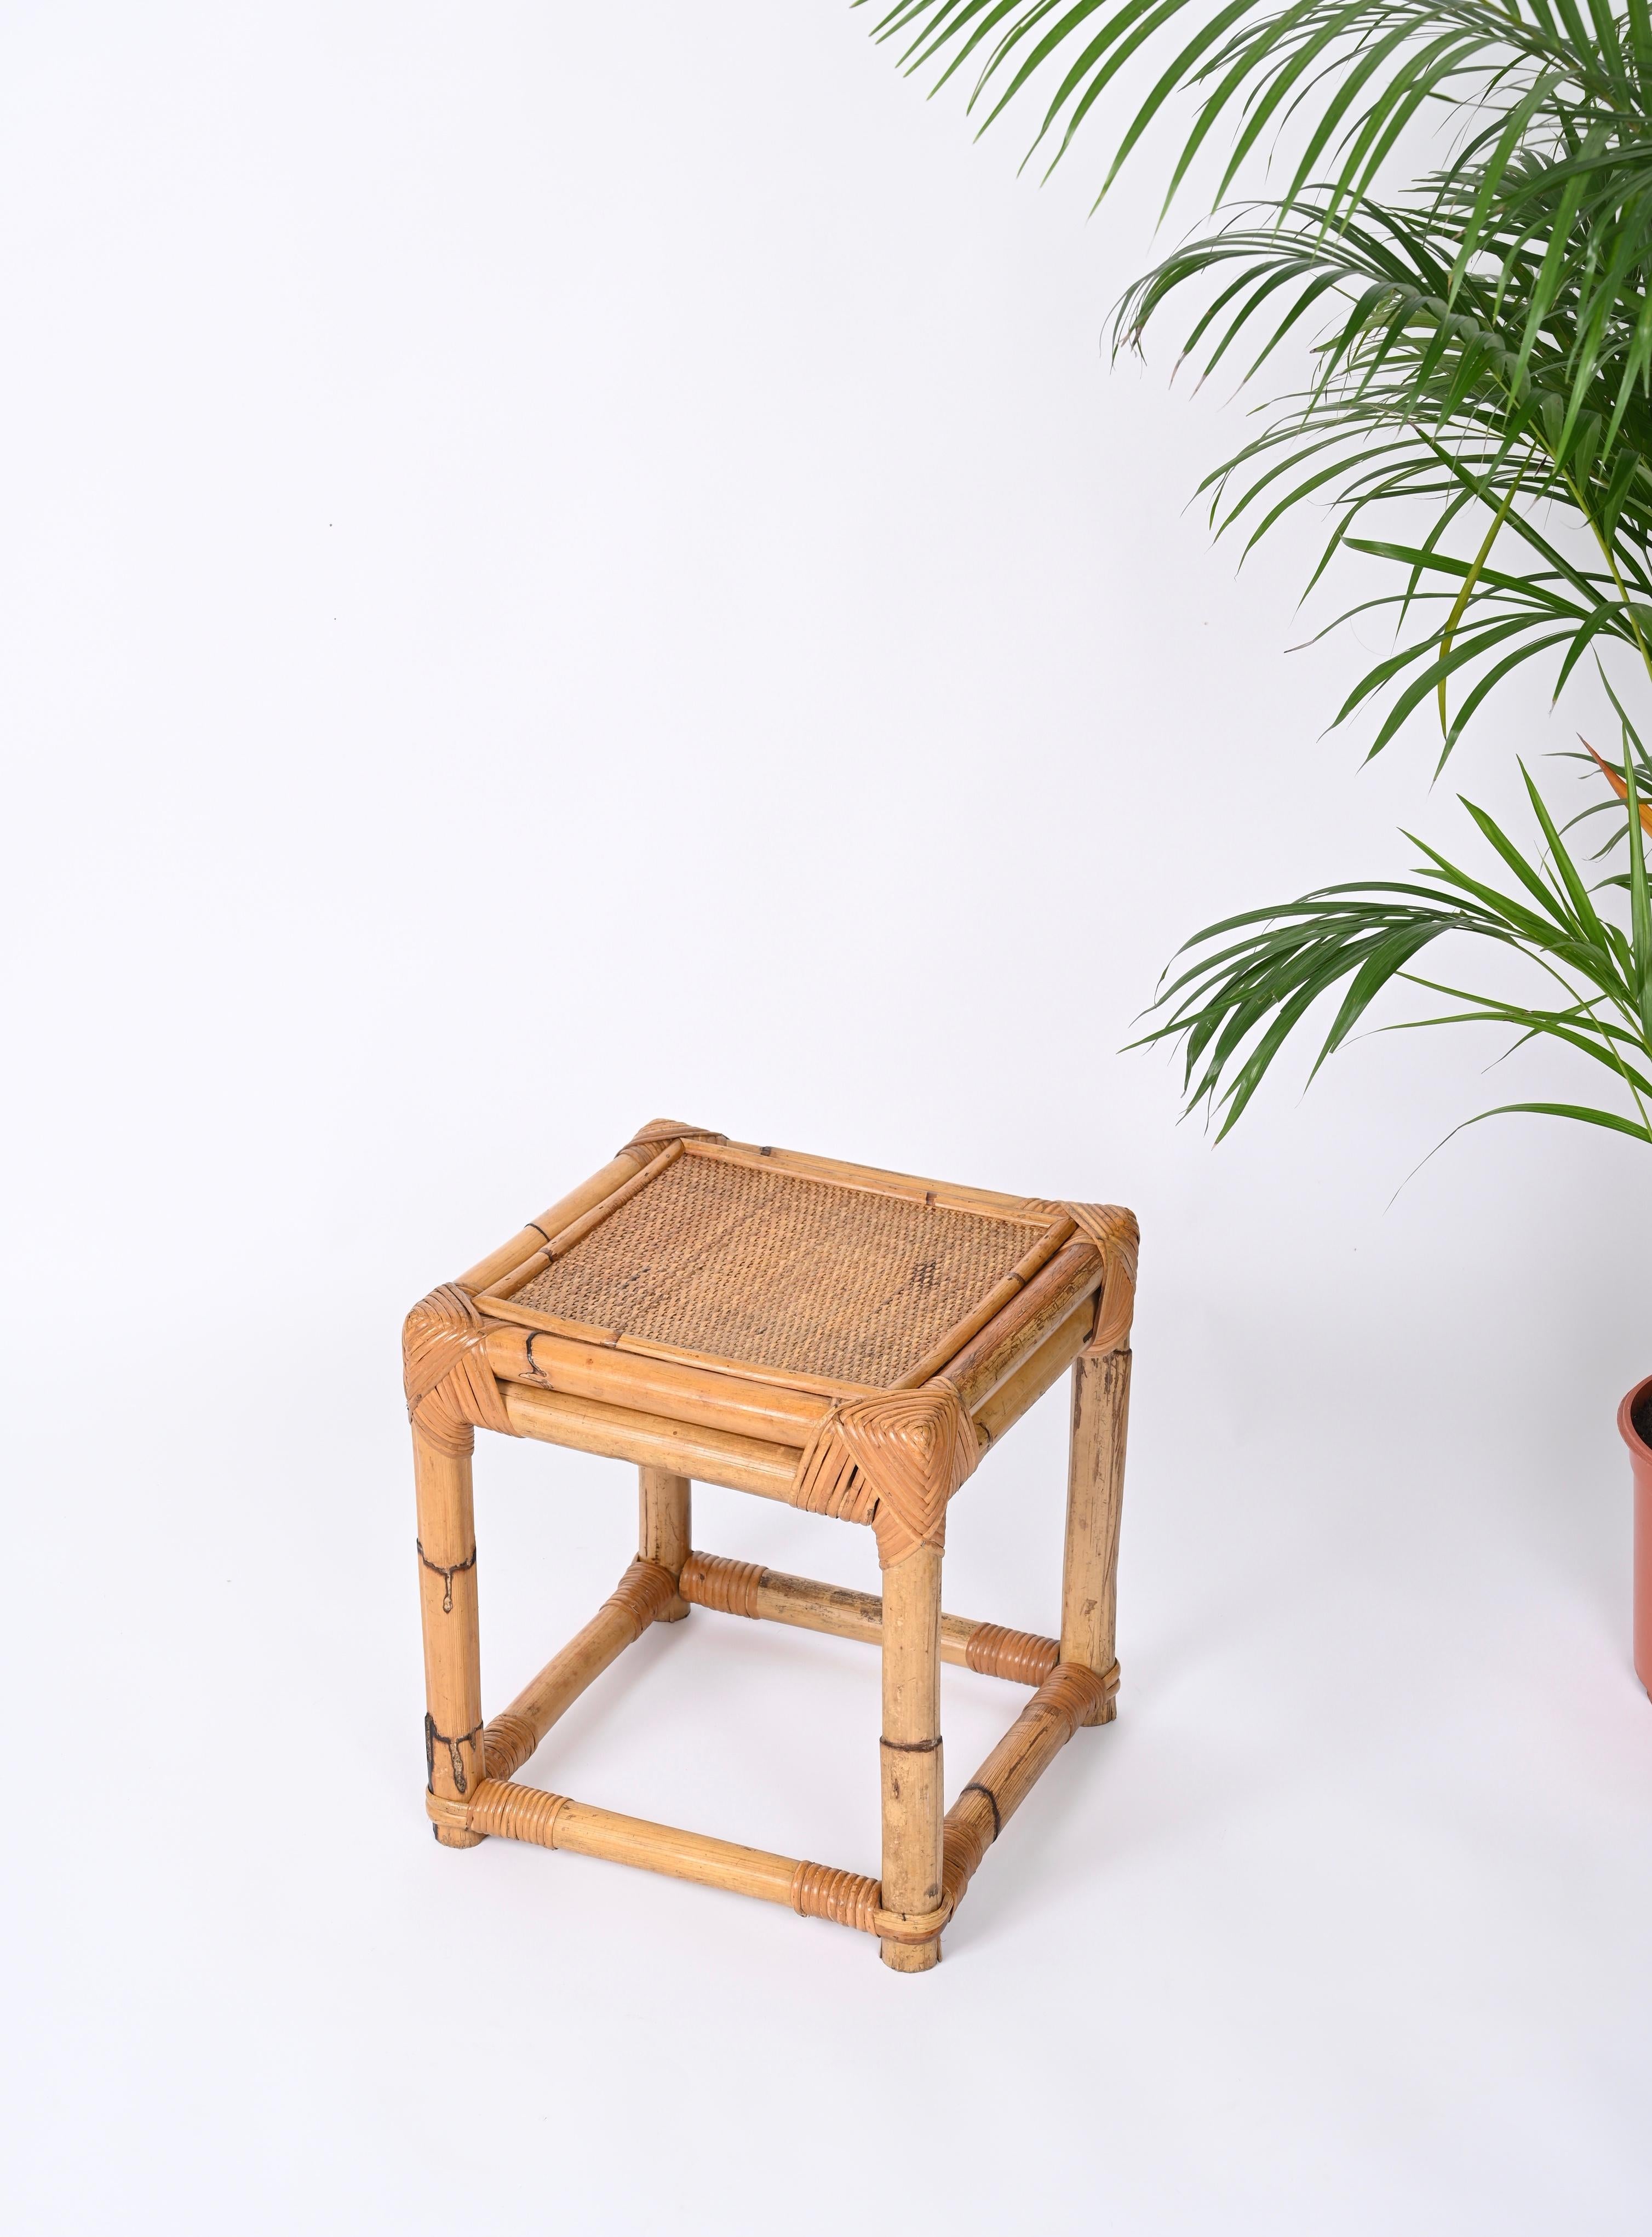 Lovely little side table or ottoman in bamboo and rattan, produced in Italy in the 70s.  

This sturdy ottoman has a cube-shaped structure fully made in bamboo canes with the top having a double bamboo frame, the corners are embellished by stunning